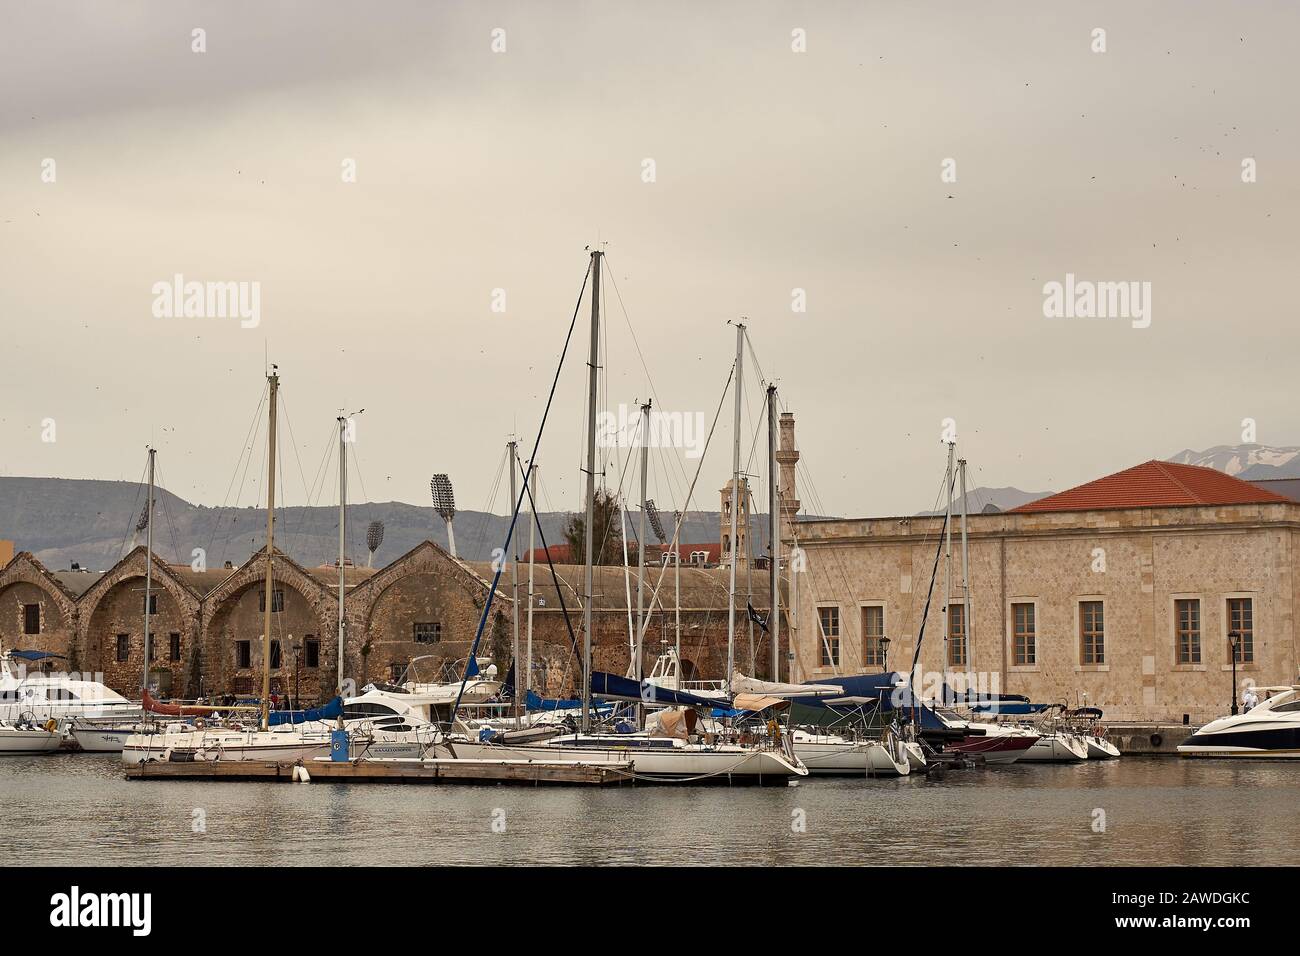 Chania, Crete, Greece. May 20: famous venetian harbour bay waterfront of Chania old town, Crete, Greece in summer Stock Photo